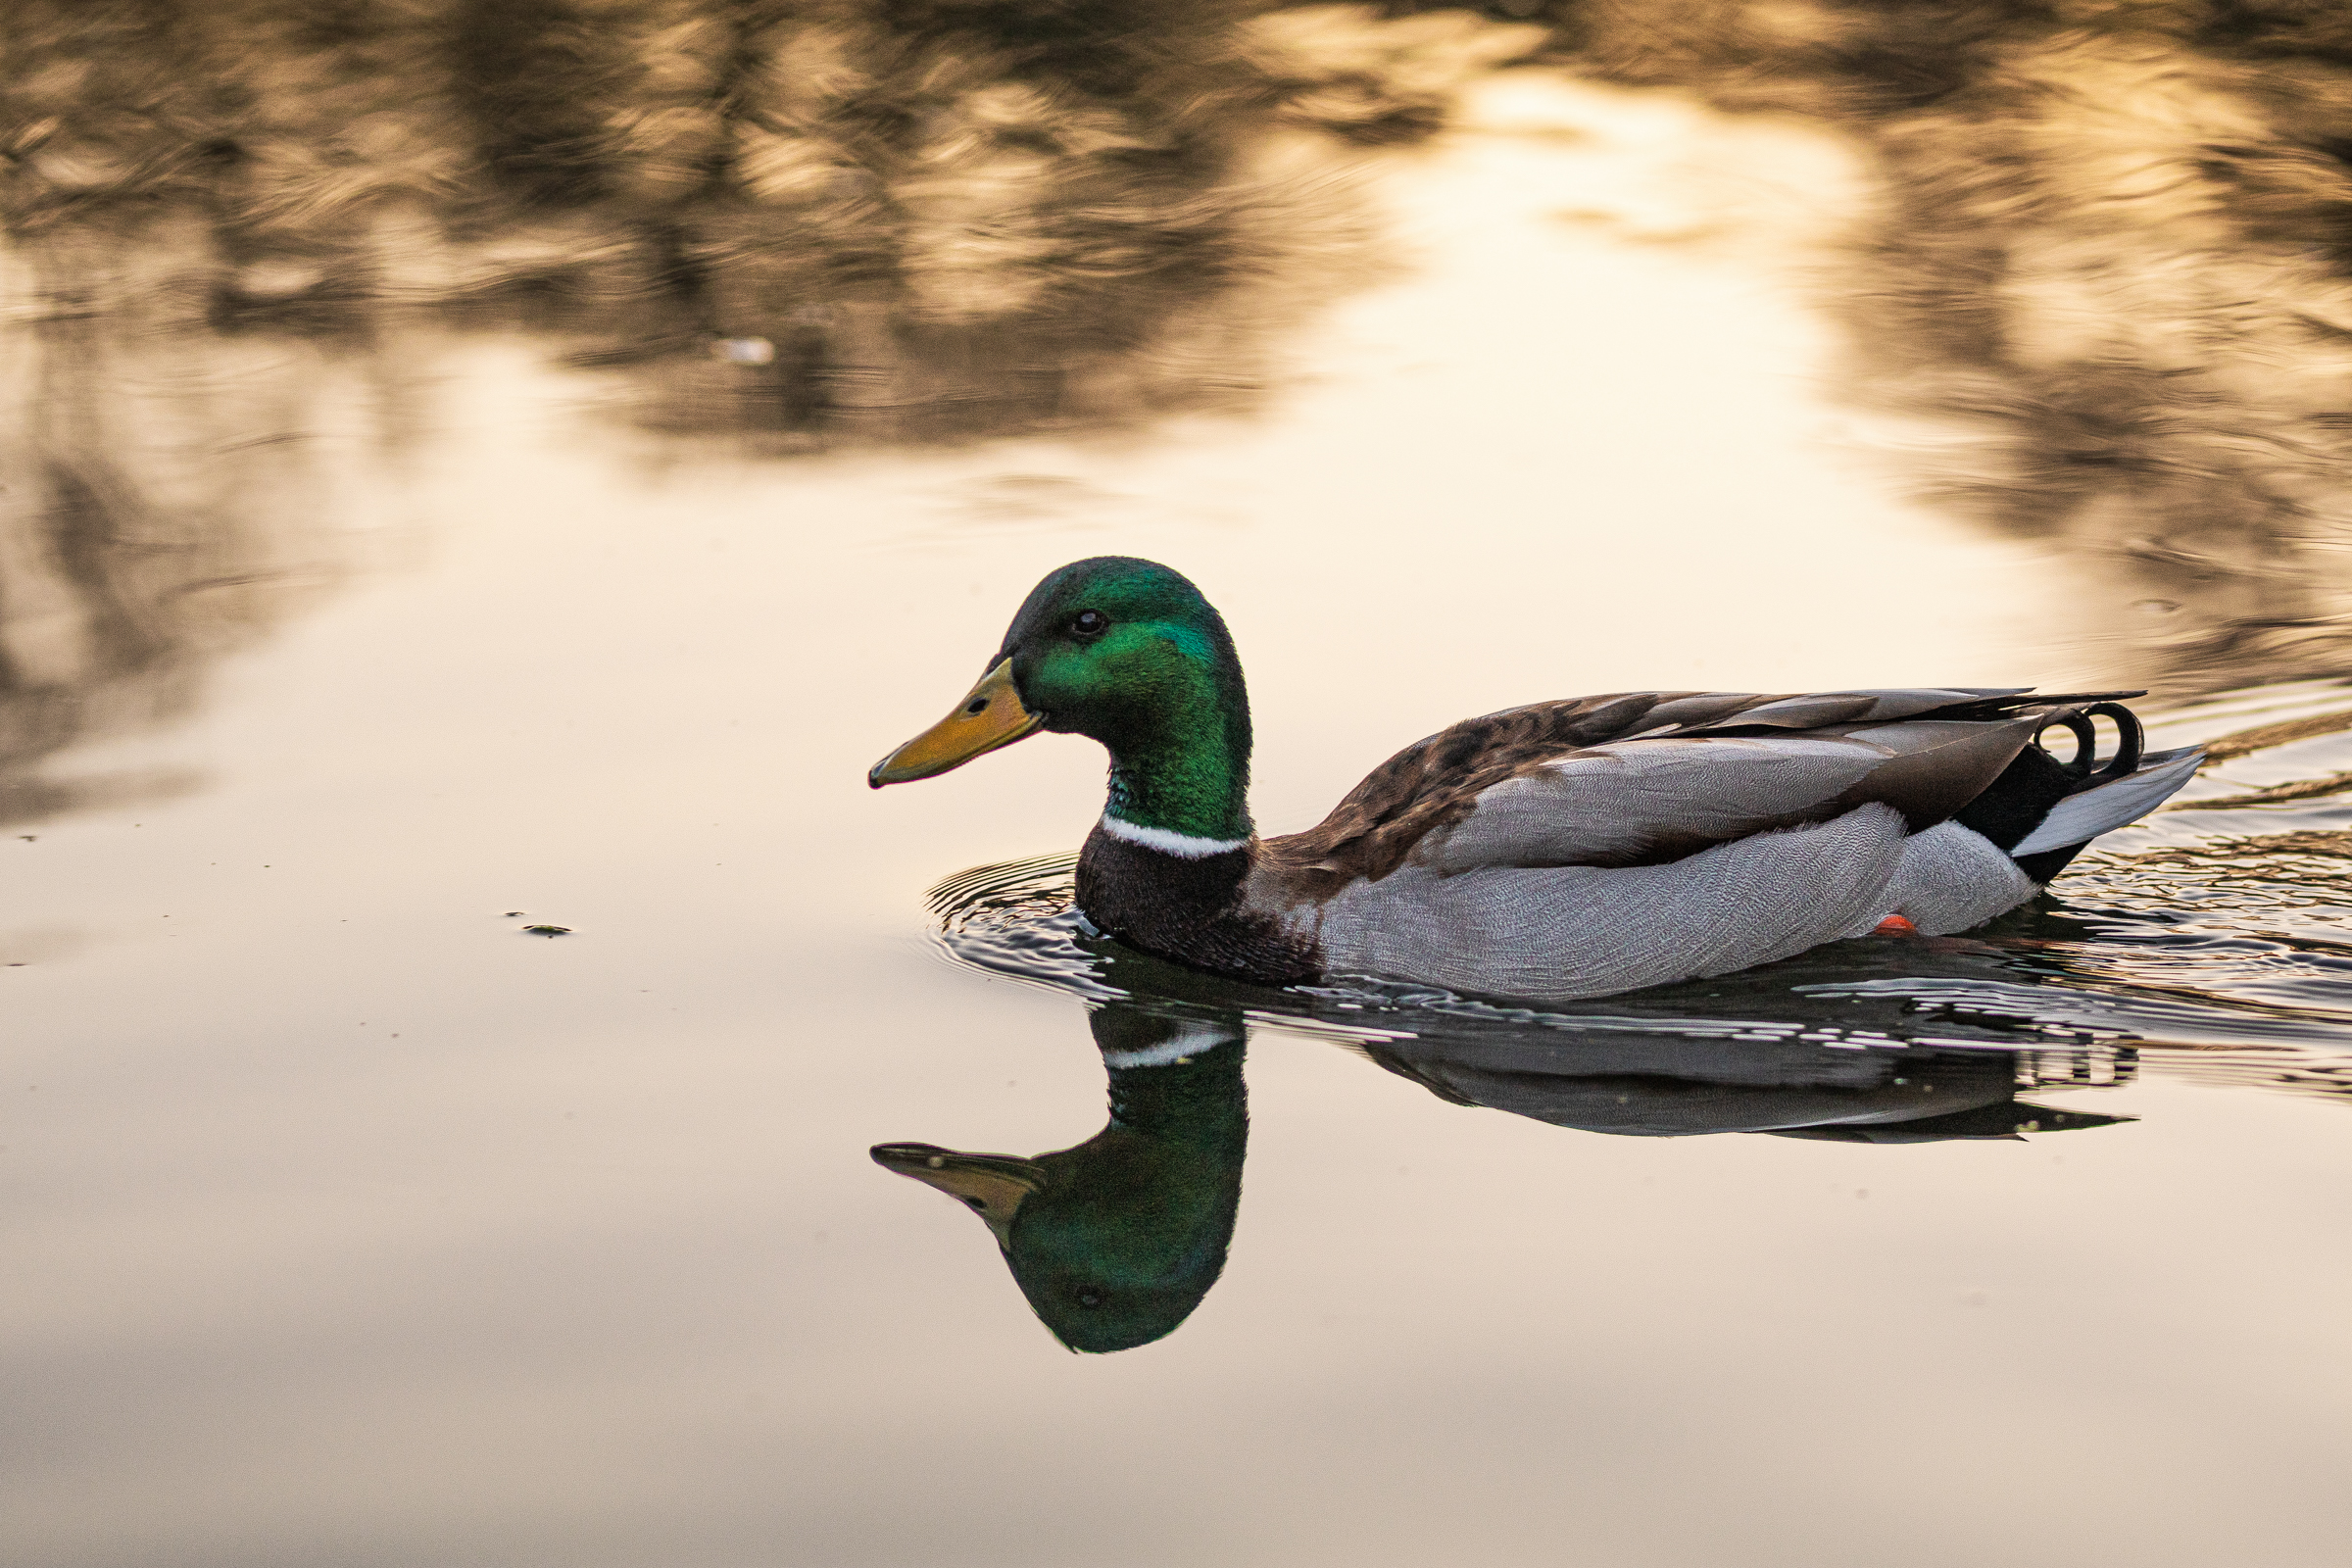 A duck swimming across a pond, cleanly reflected on the waters surface